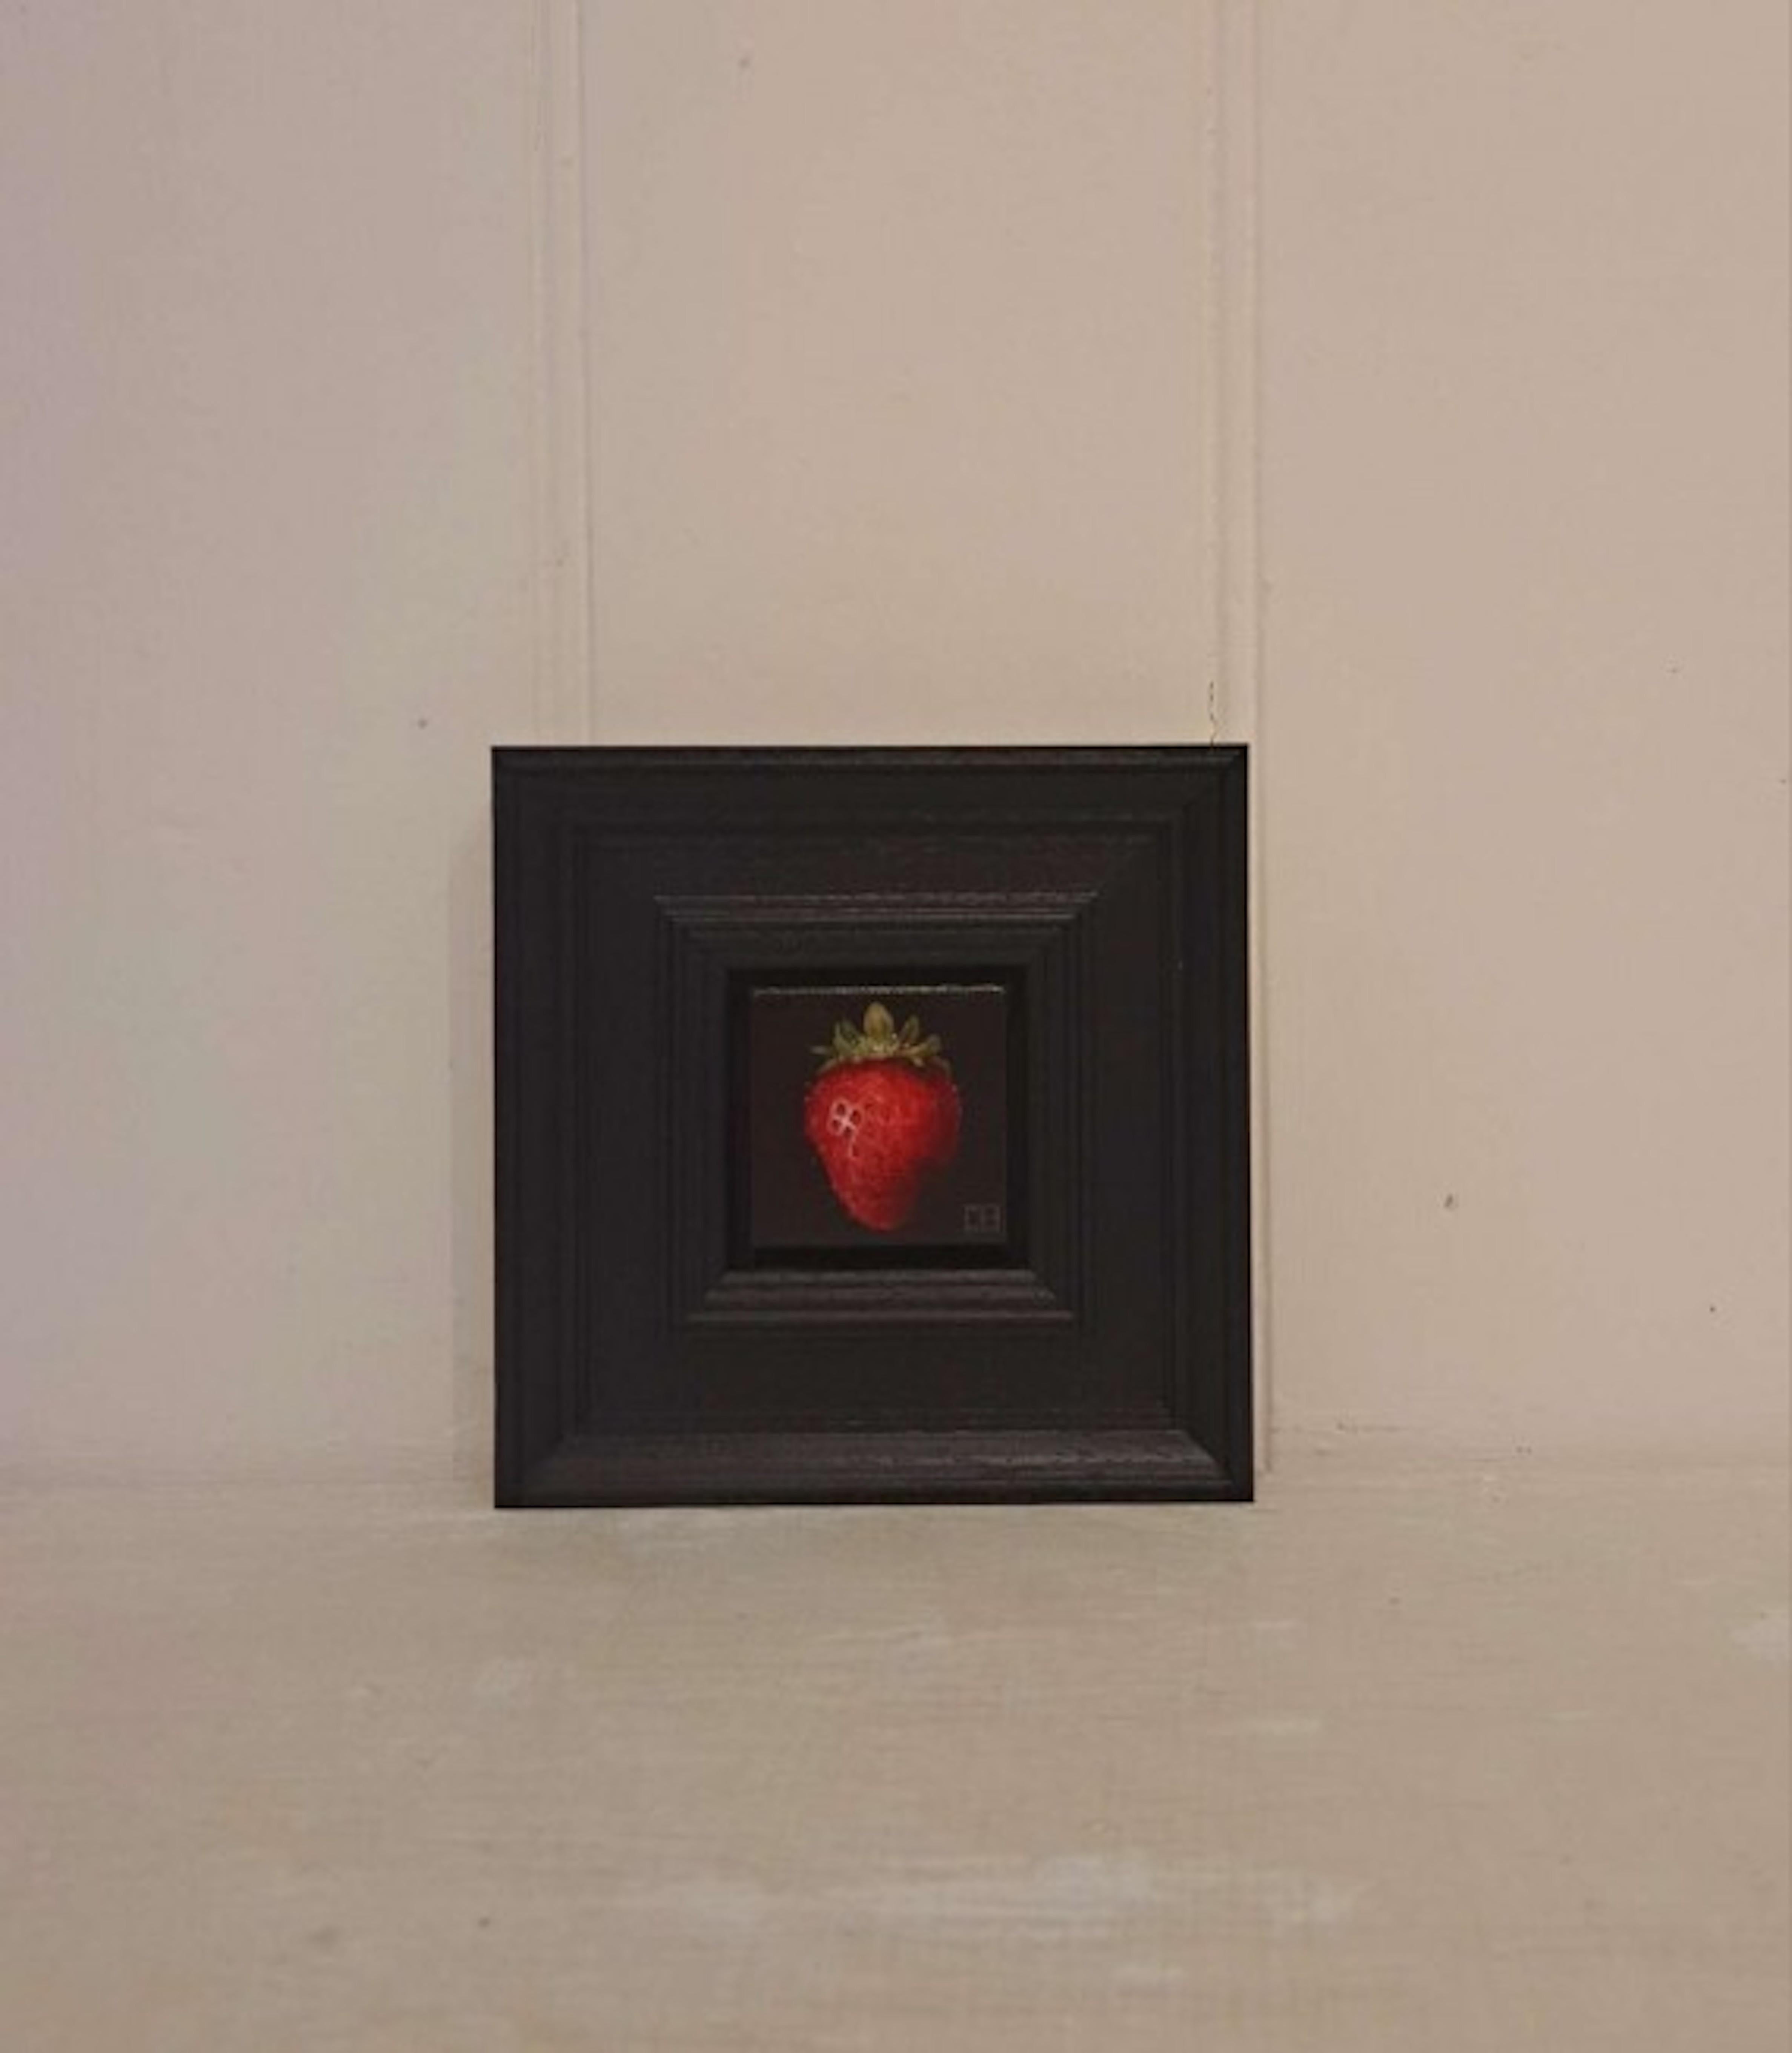 Pocket Crimson Strawberry is an original oil painting by Dani Humberstone as part of her Pocket Painting series featuring small scale realistic oil paintings, with a nod to baroque still life painting. The paintings are set in a black wood layered